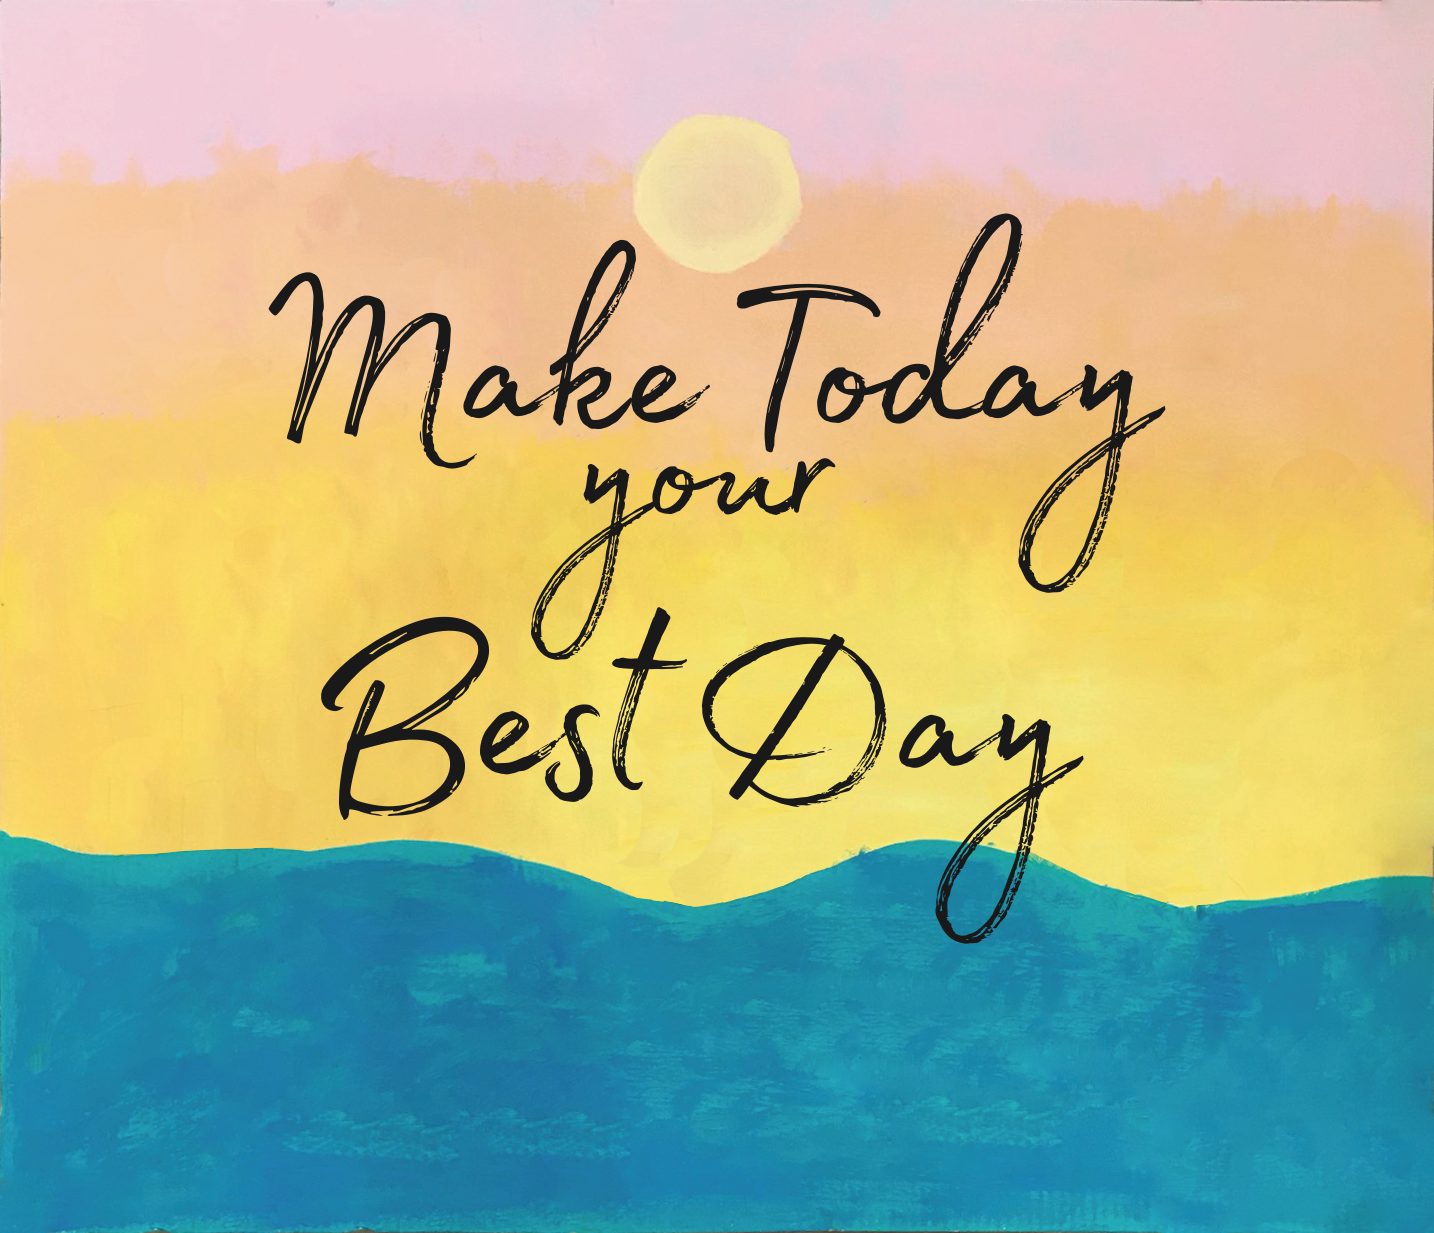 Make Today your Best Day